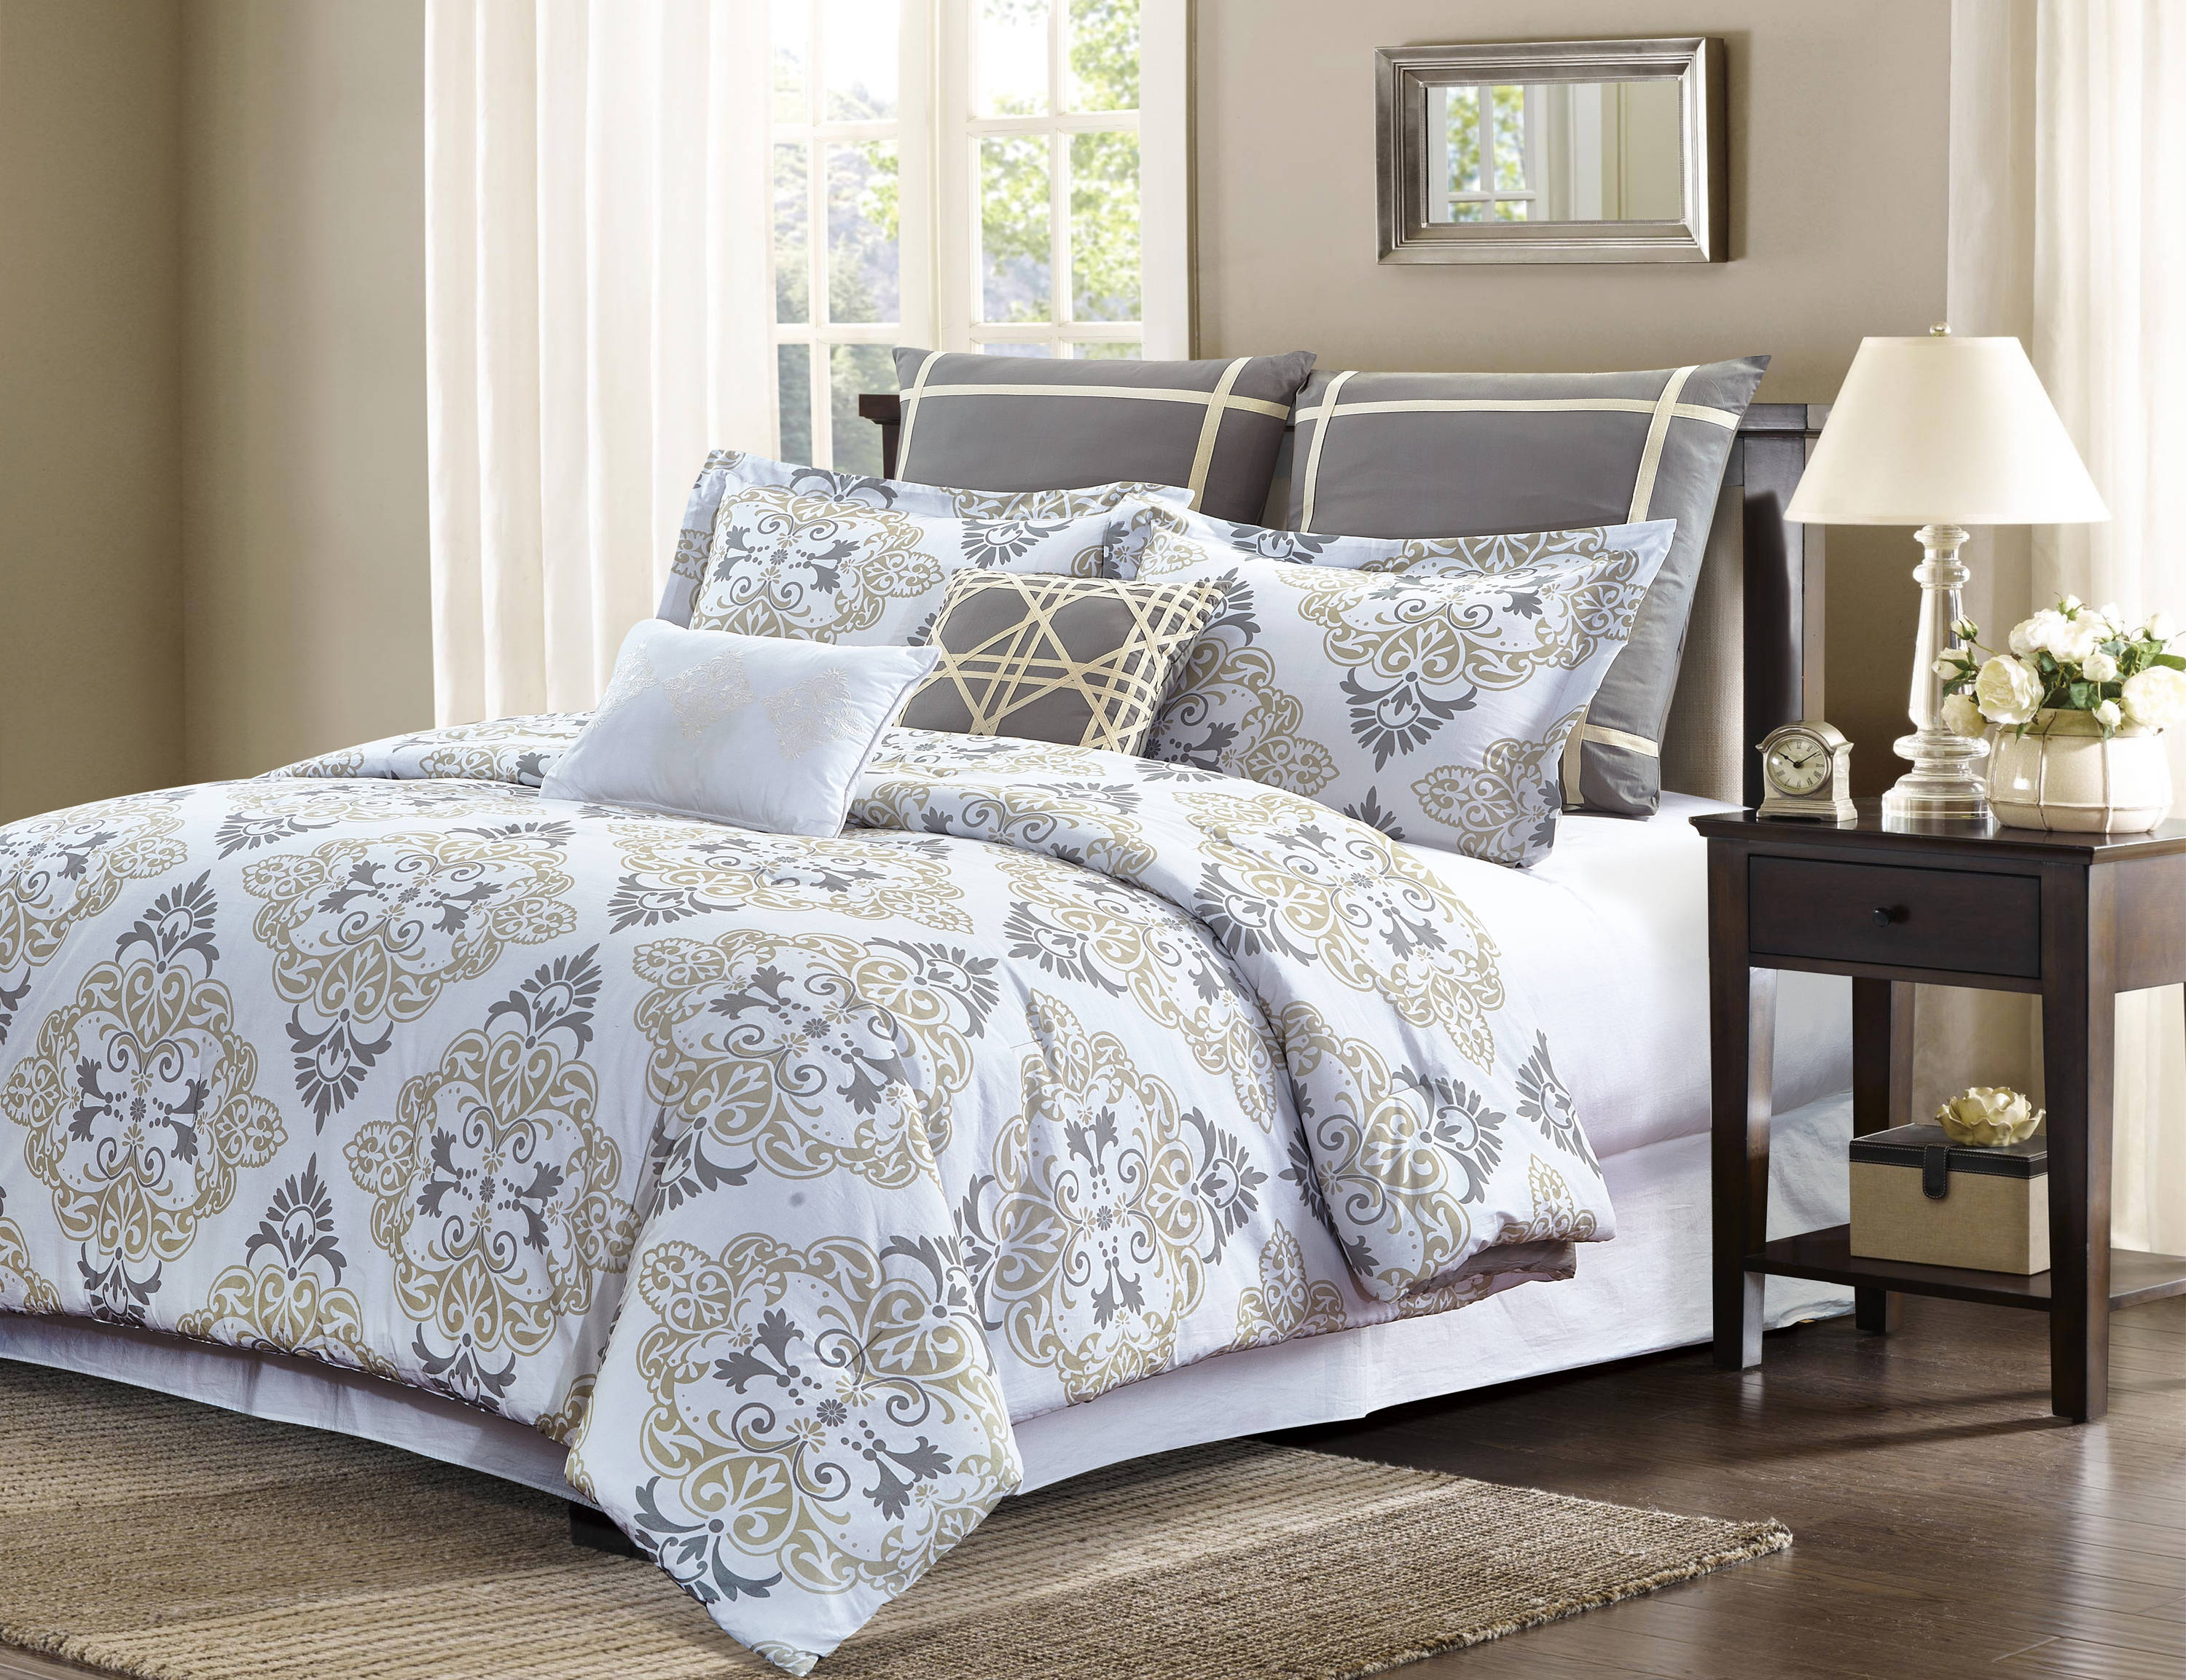 Style Quarters 7-Piece Gray and Taupe Damask Print Queen Comforter